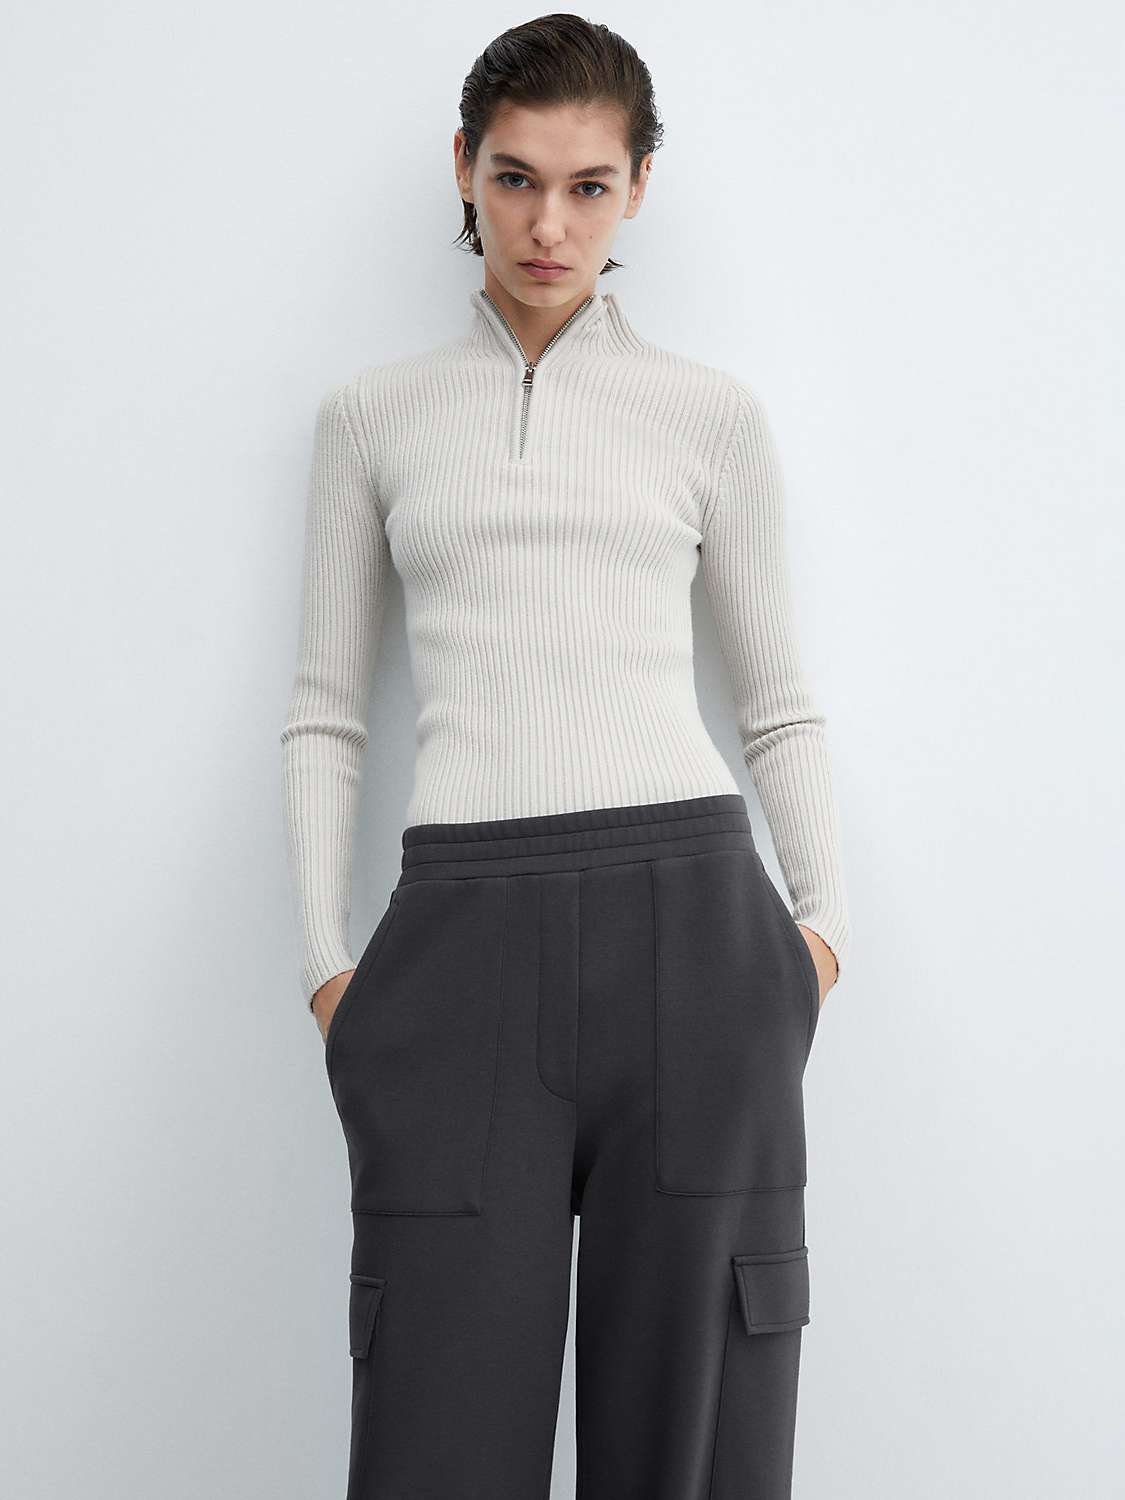 Buy Mango Elasticated Cargo Trousers, Charcoal Online at johnlewis.com